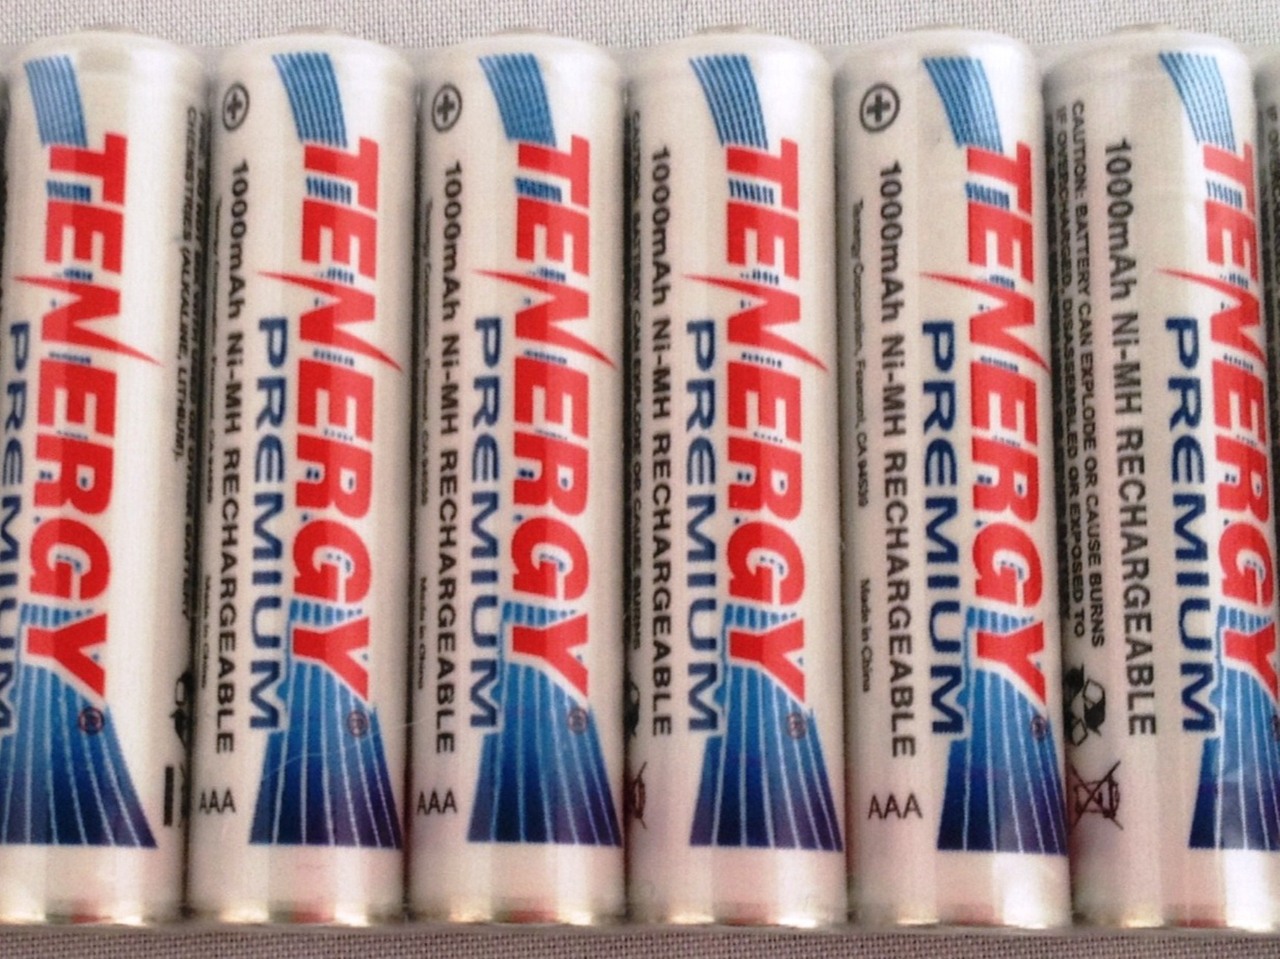 Tenergy Premium AAA NiMH 1000 MAh 1.2 V Rechargeable Batteries - 4 Pack + FREE SHIPPING!